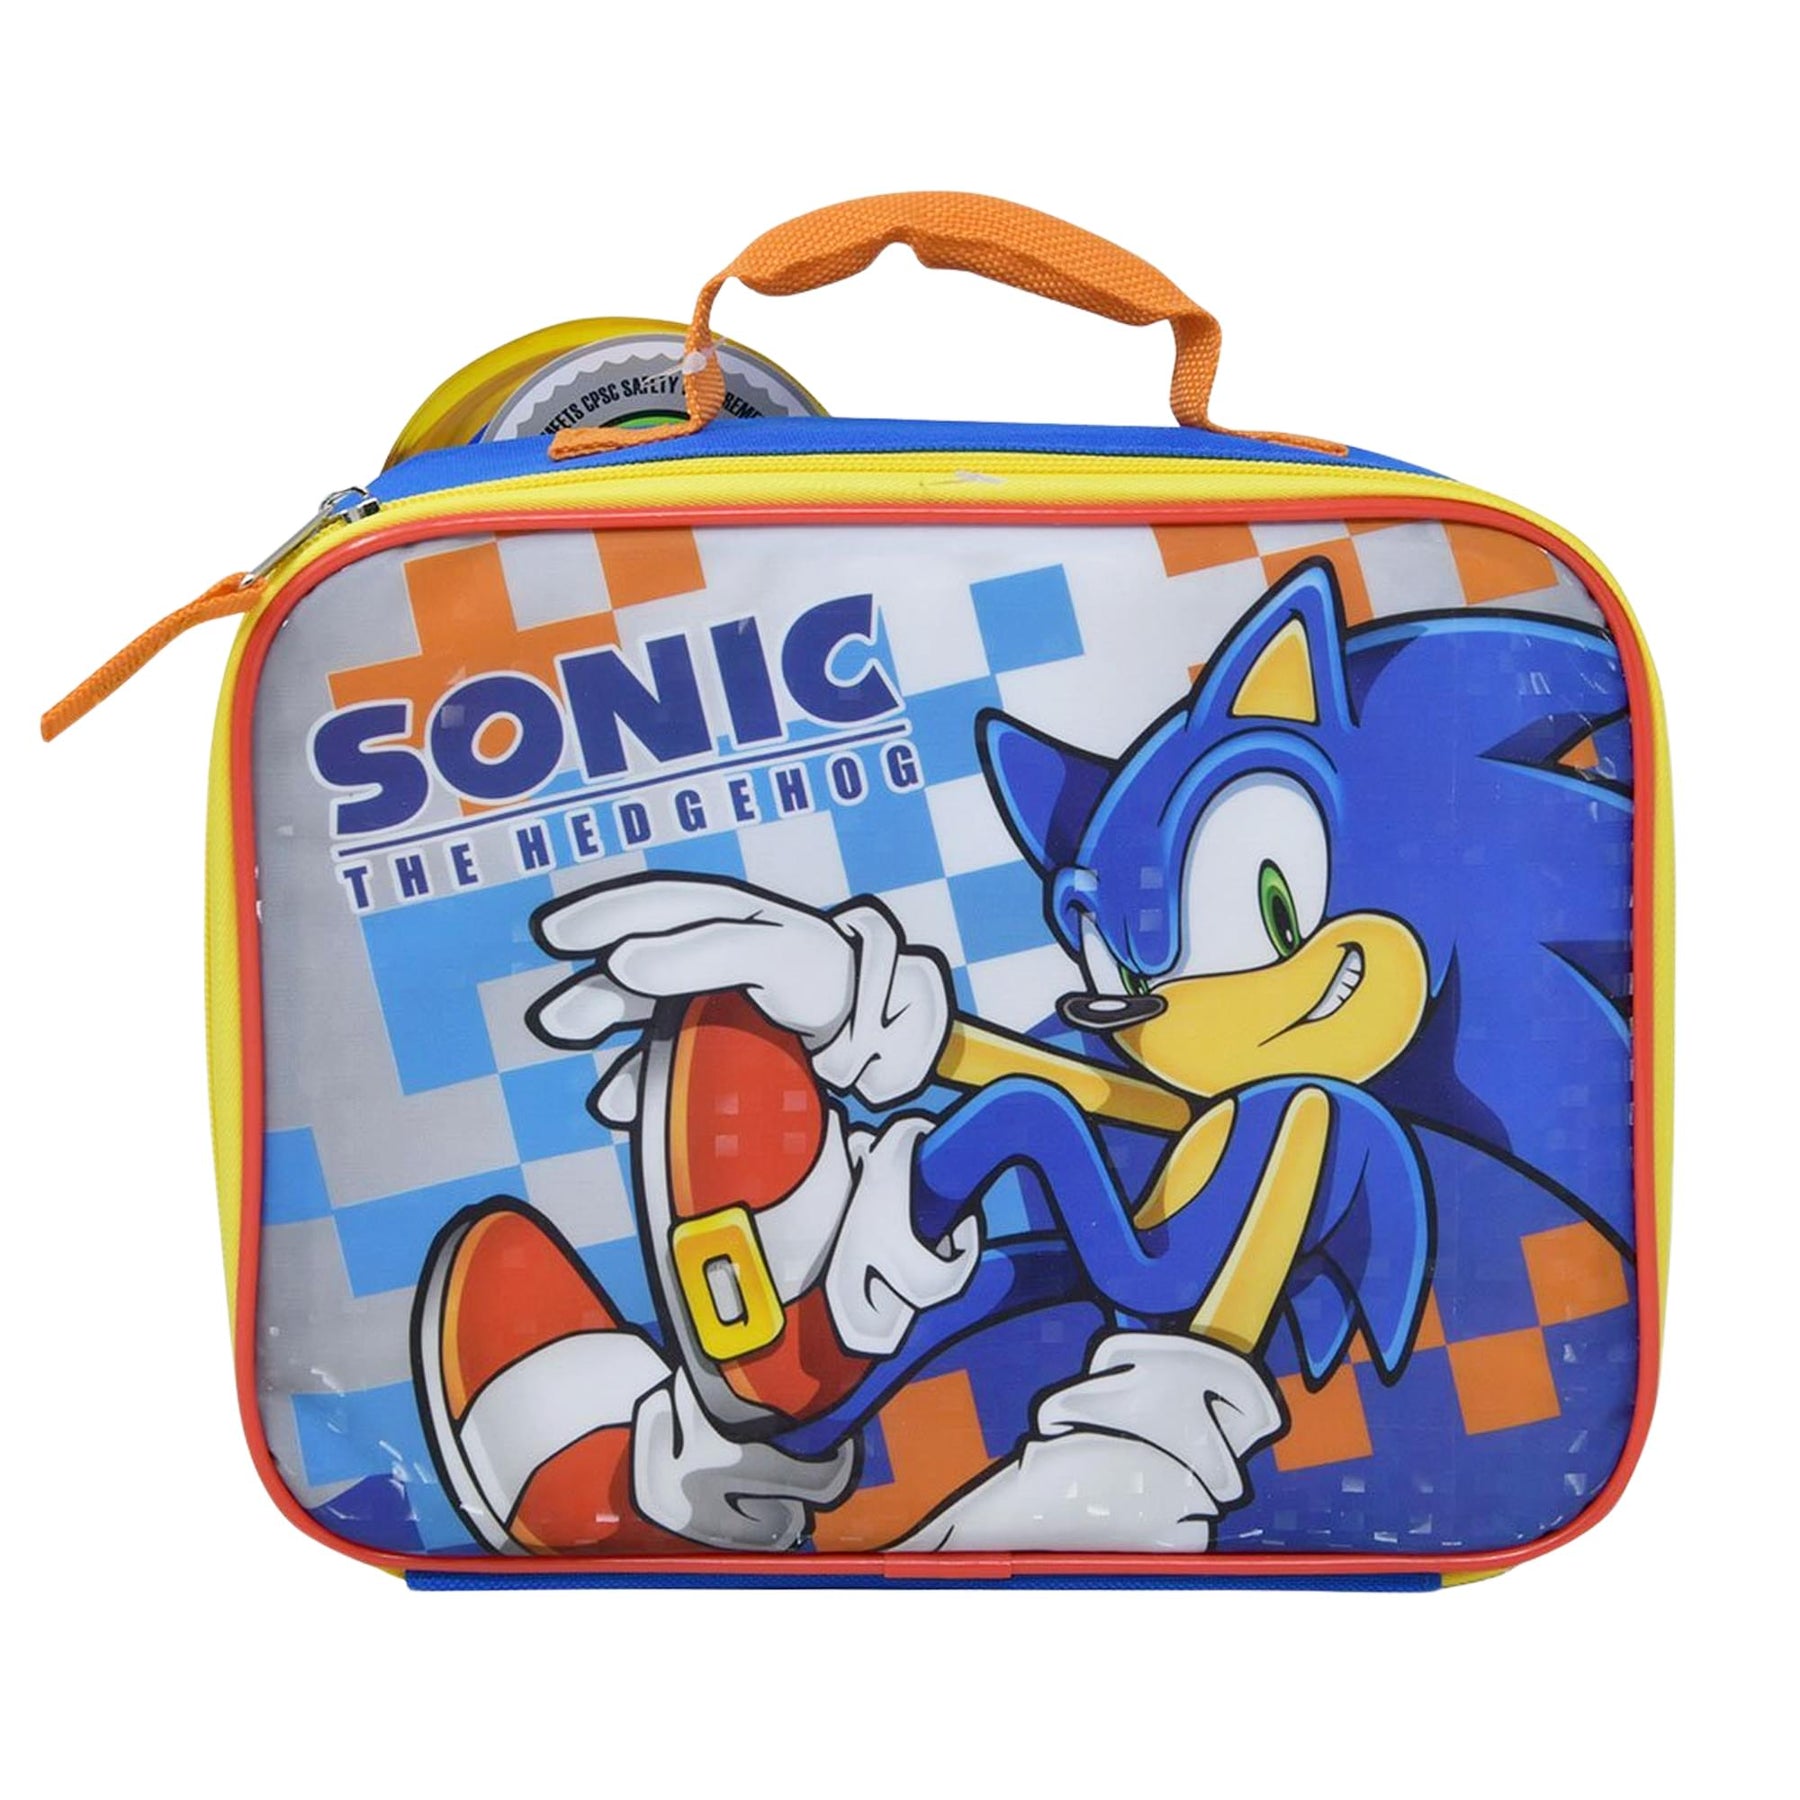 Sonic The Hedgehog Rectangle Lunch Bag | 9.5 x 3 x 8 Inches